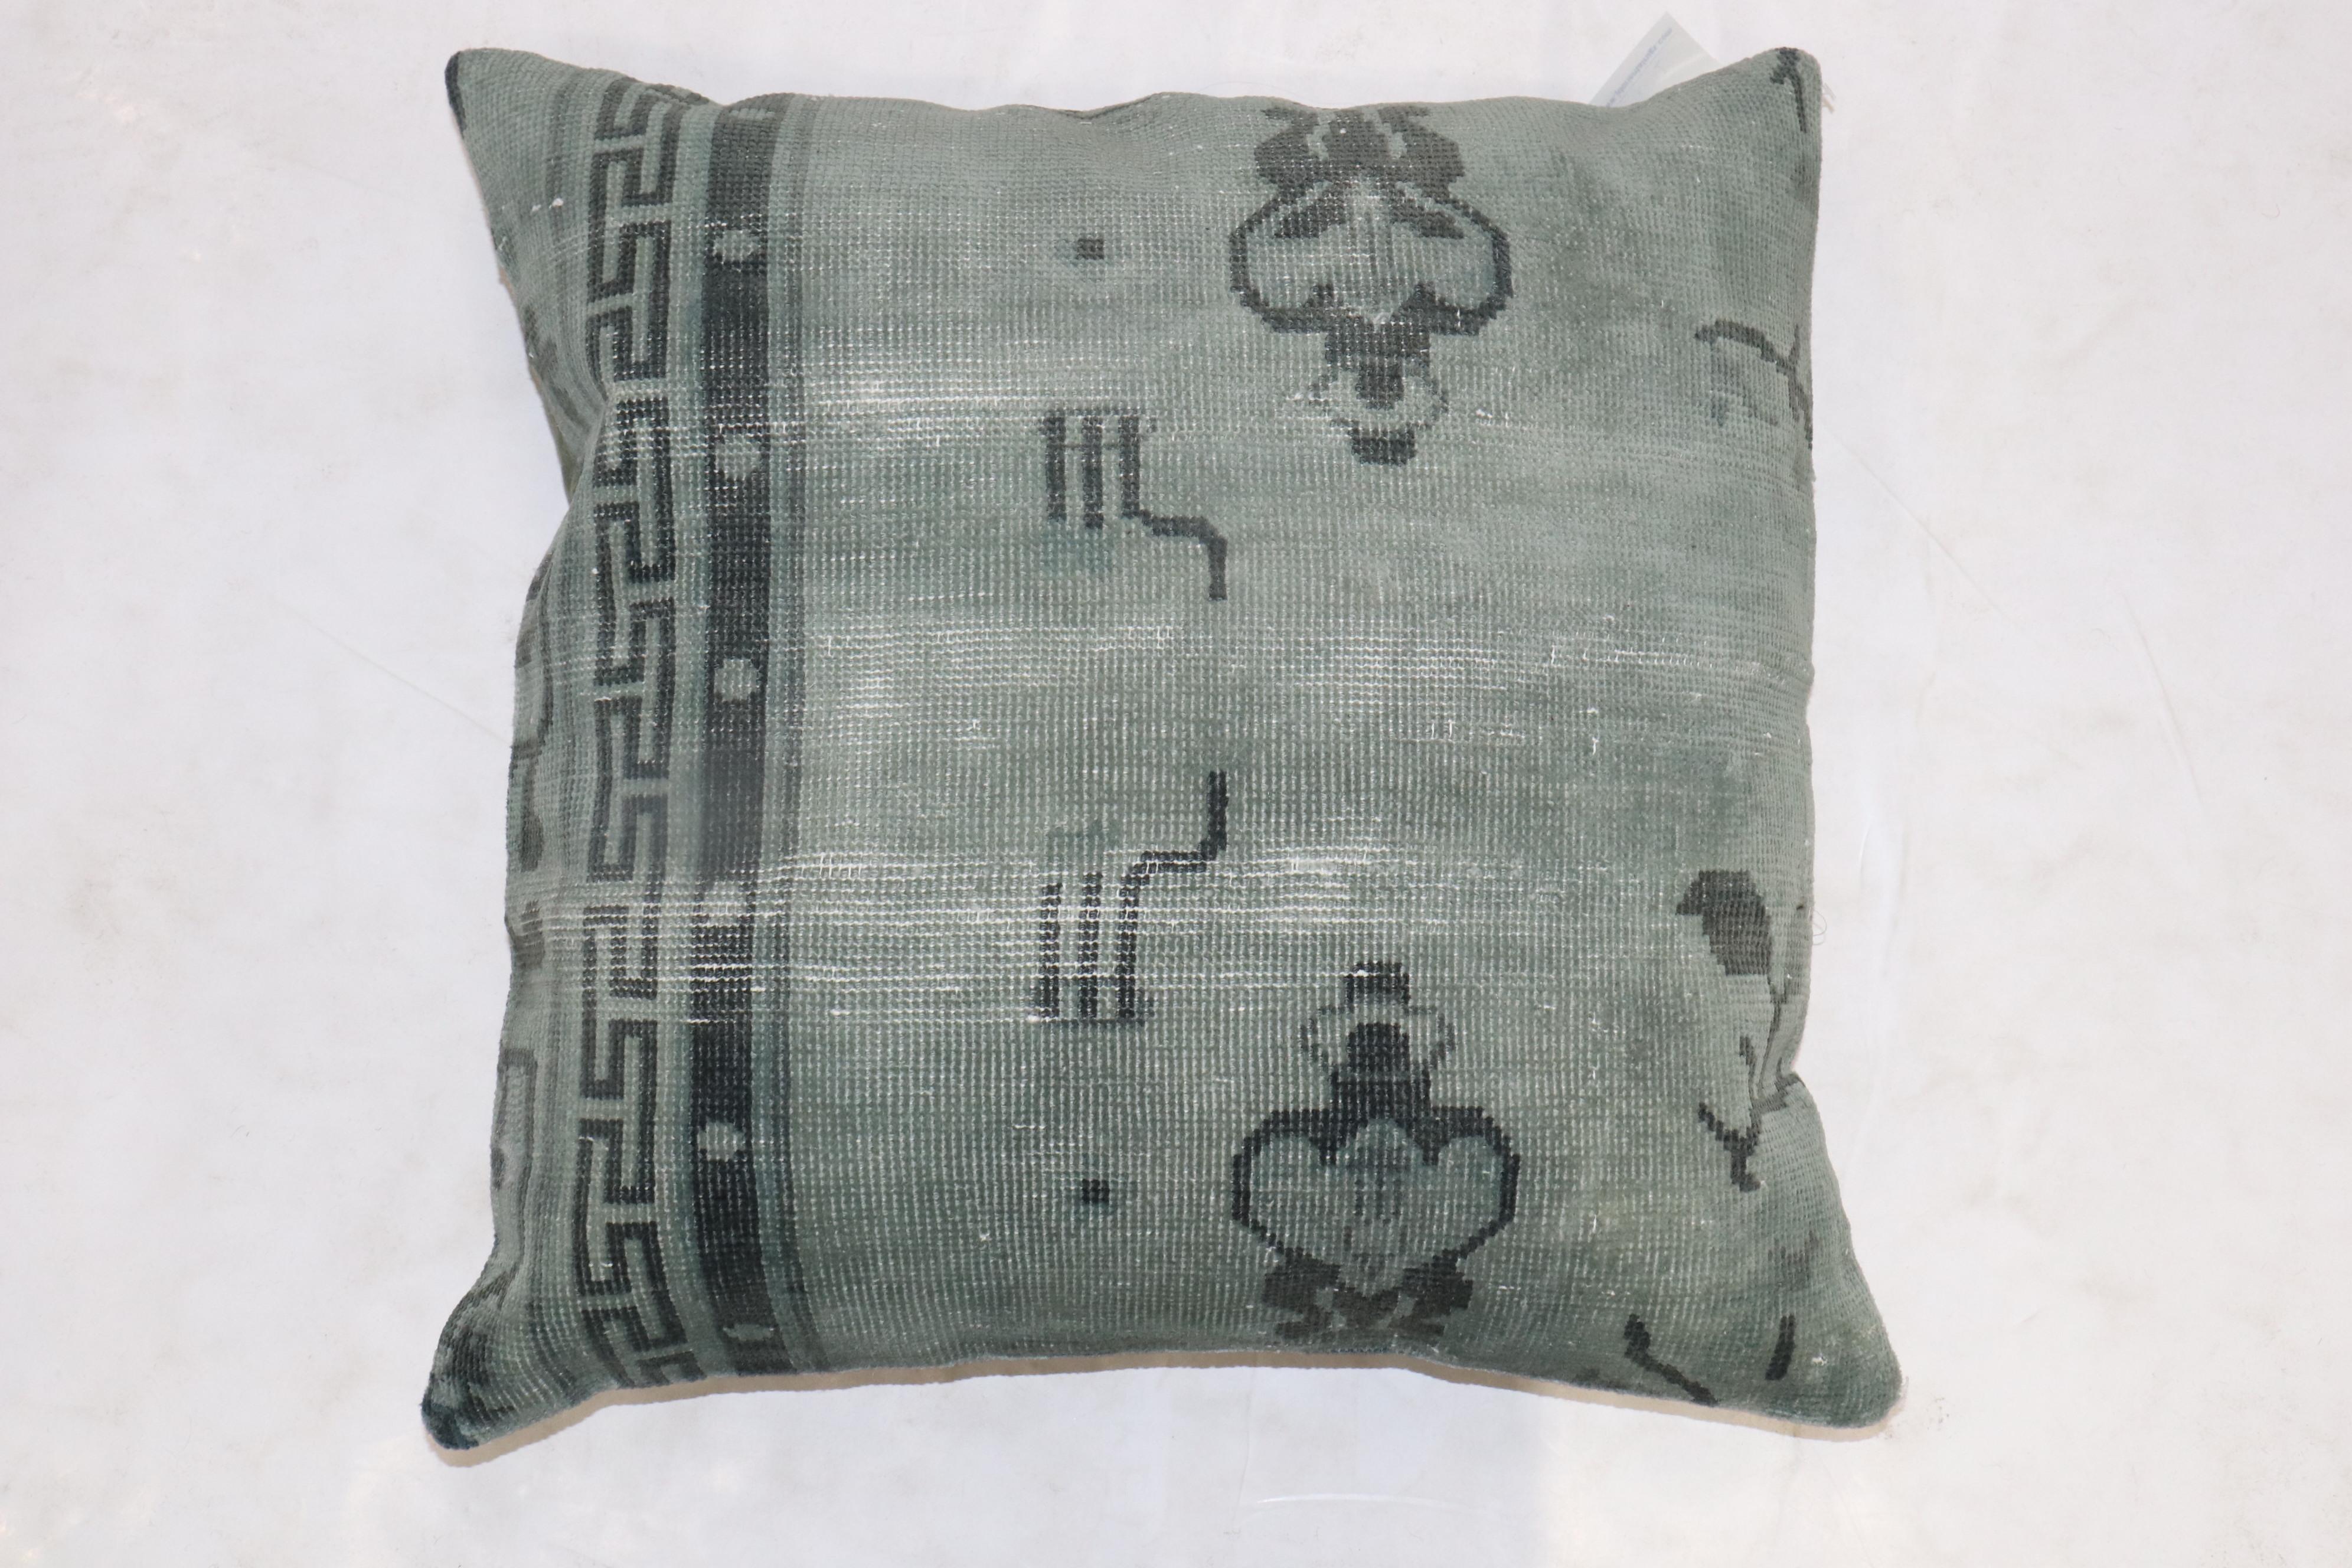 Pillow made from an old Chinese rug predominantly in green. zipper closure and polyfill provided

Measures: 23'' x 24''.